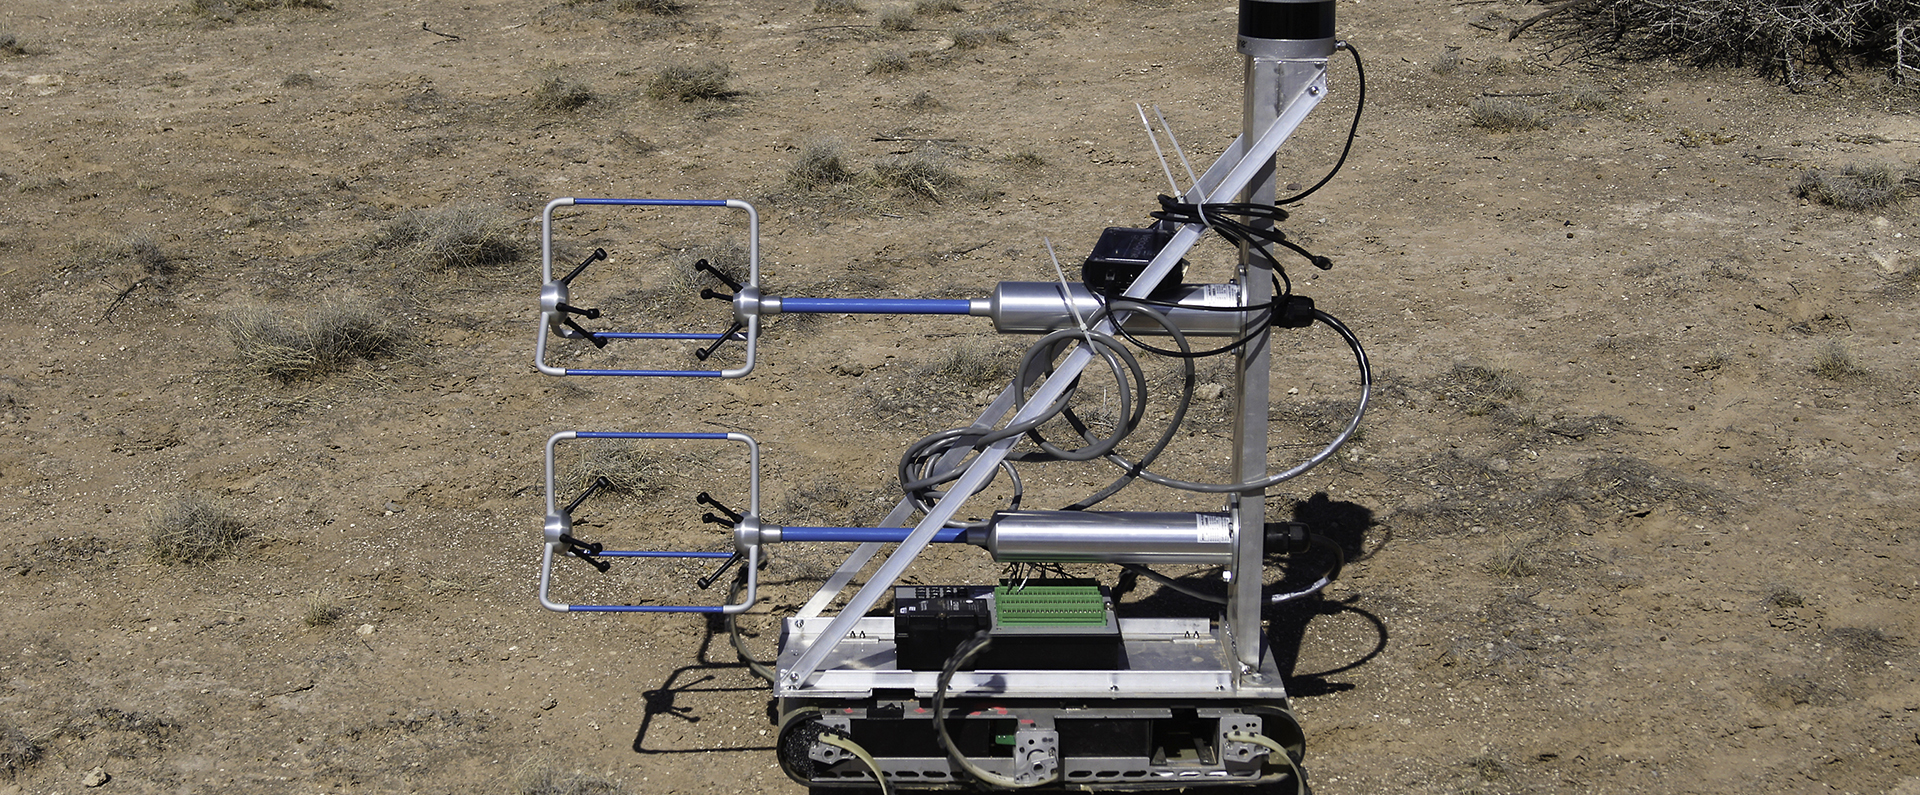 A robot prototype known as ""RHex" fitted with sonic anemometers for measuring wind speed 